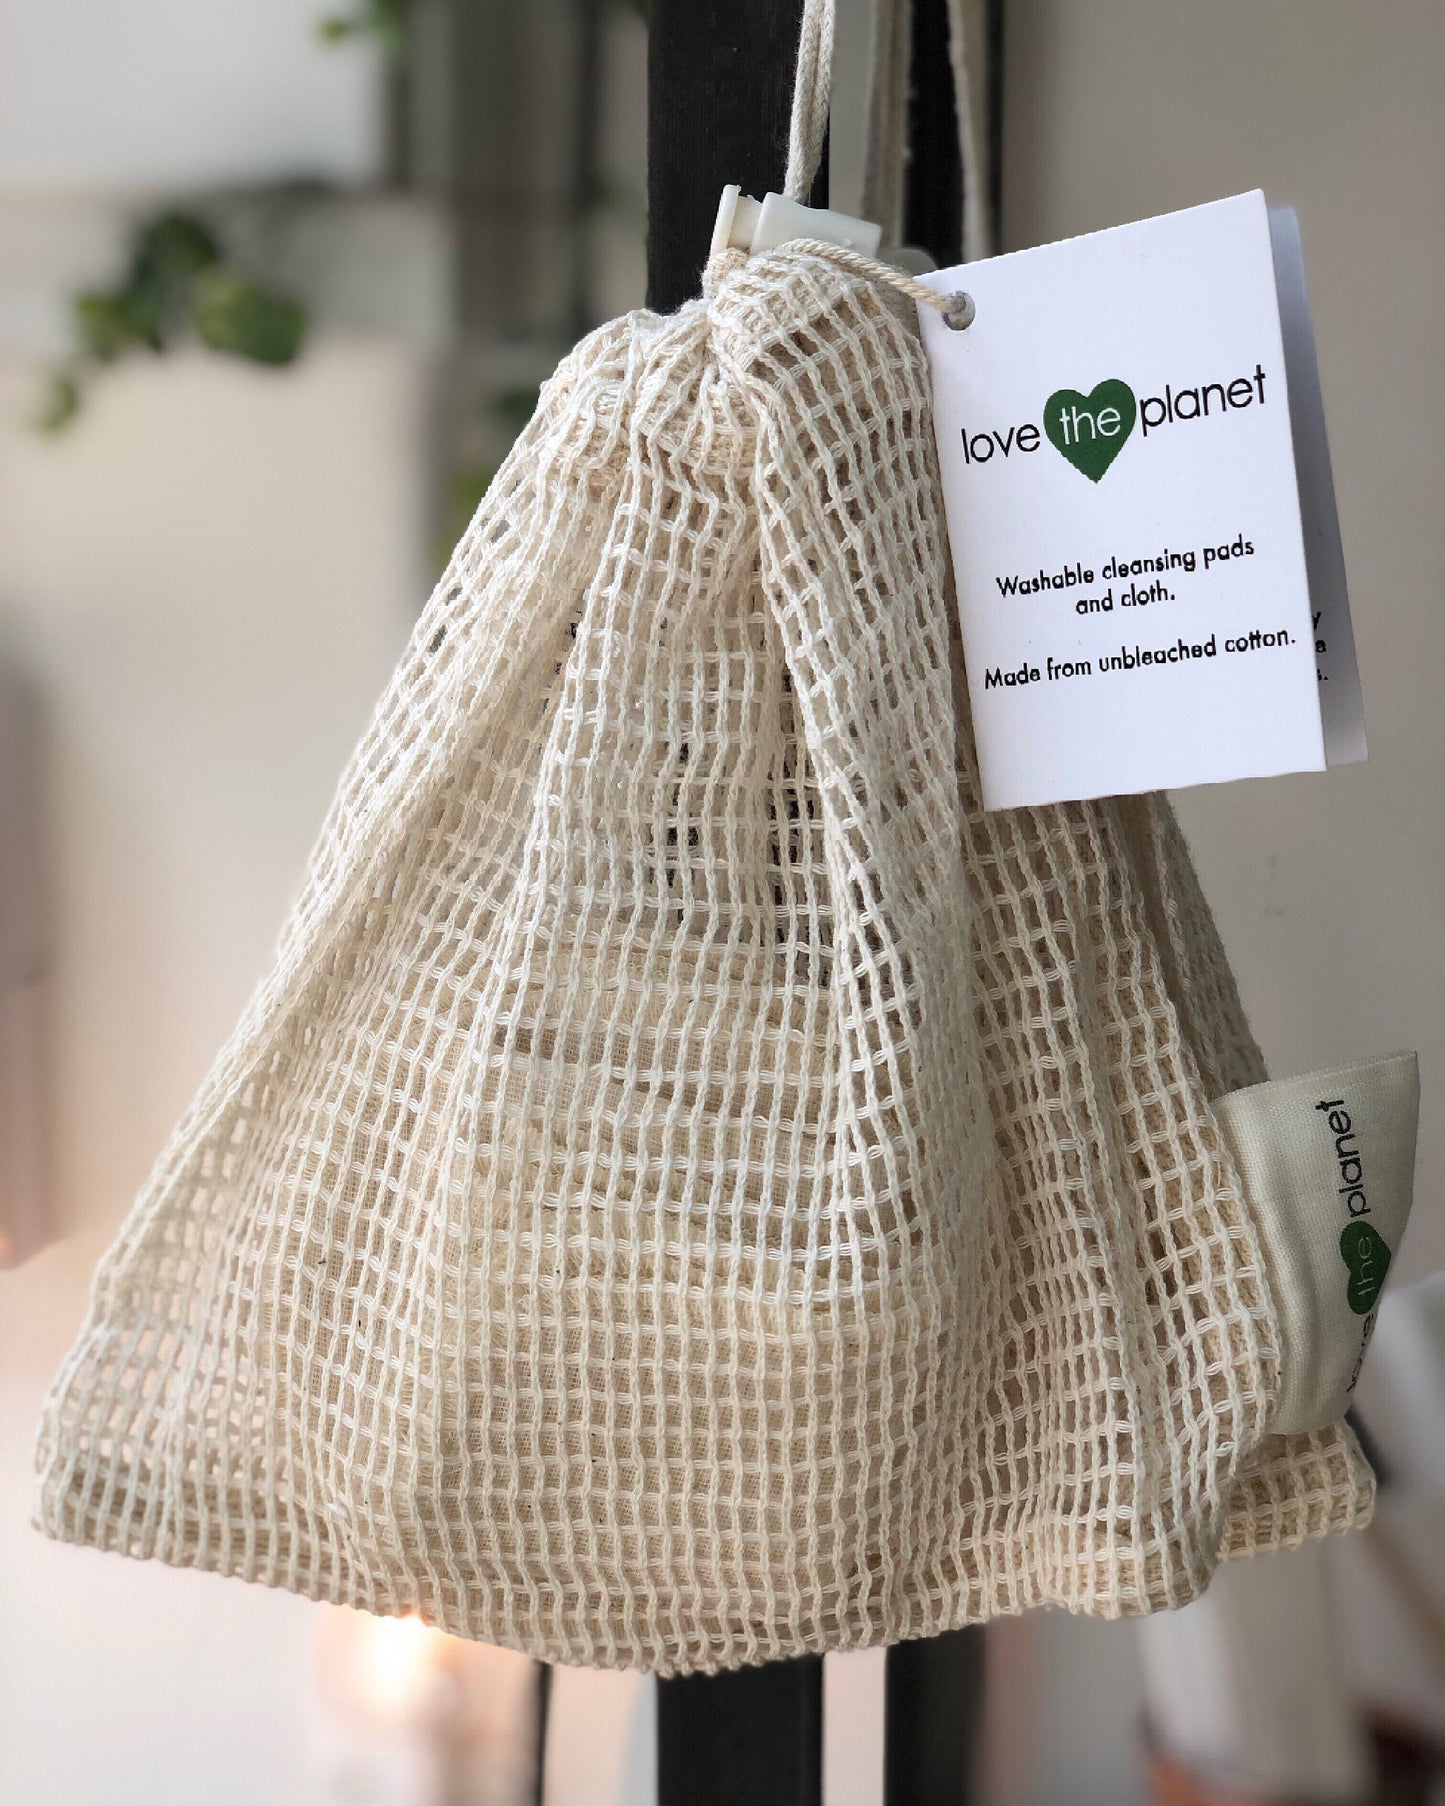 love the planet - cotton muslin rounds & cloth set - in a net bag